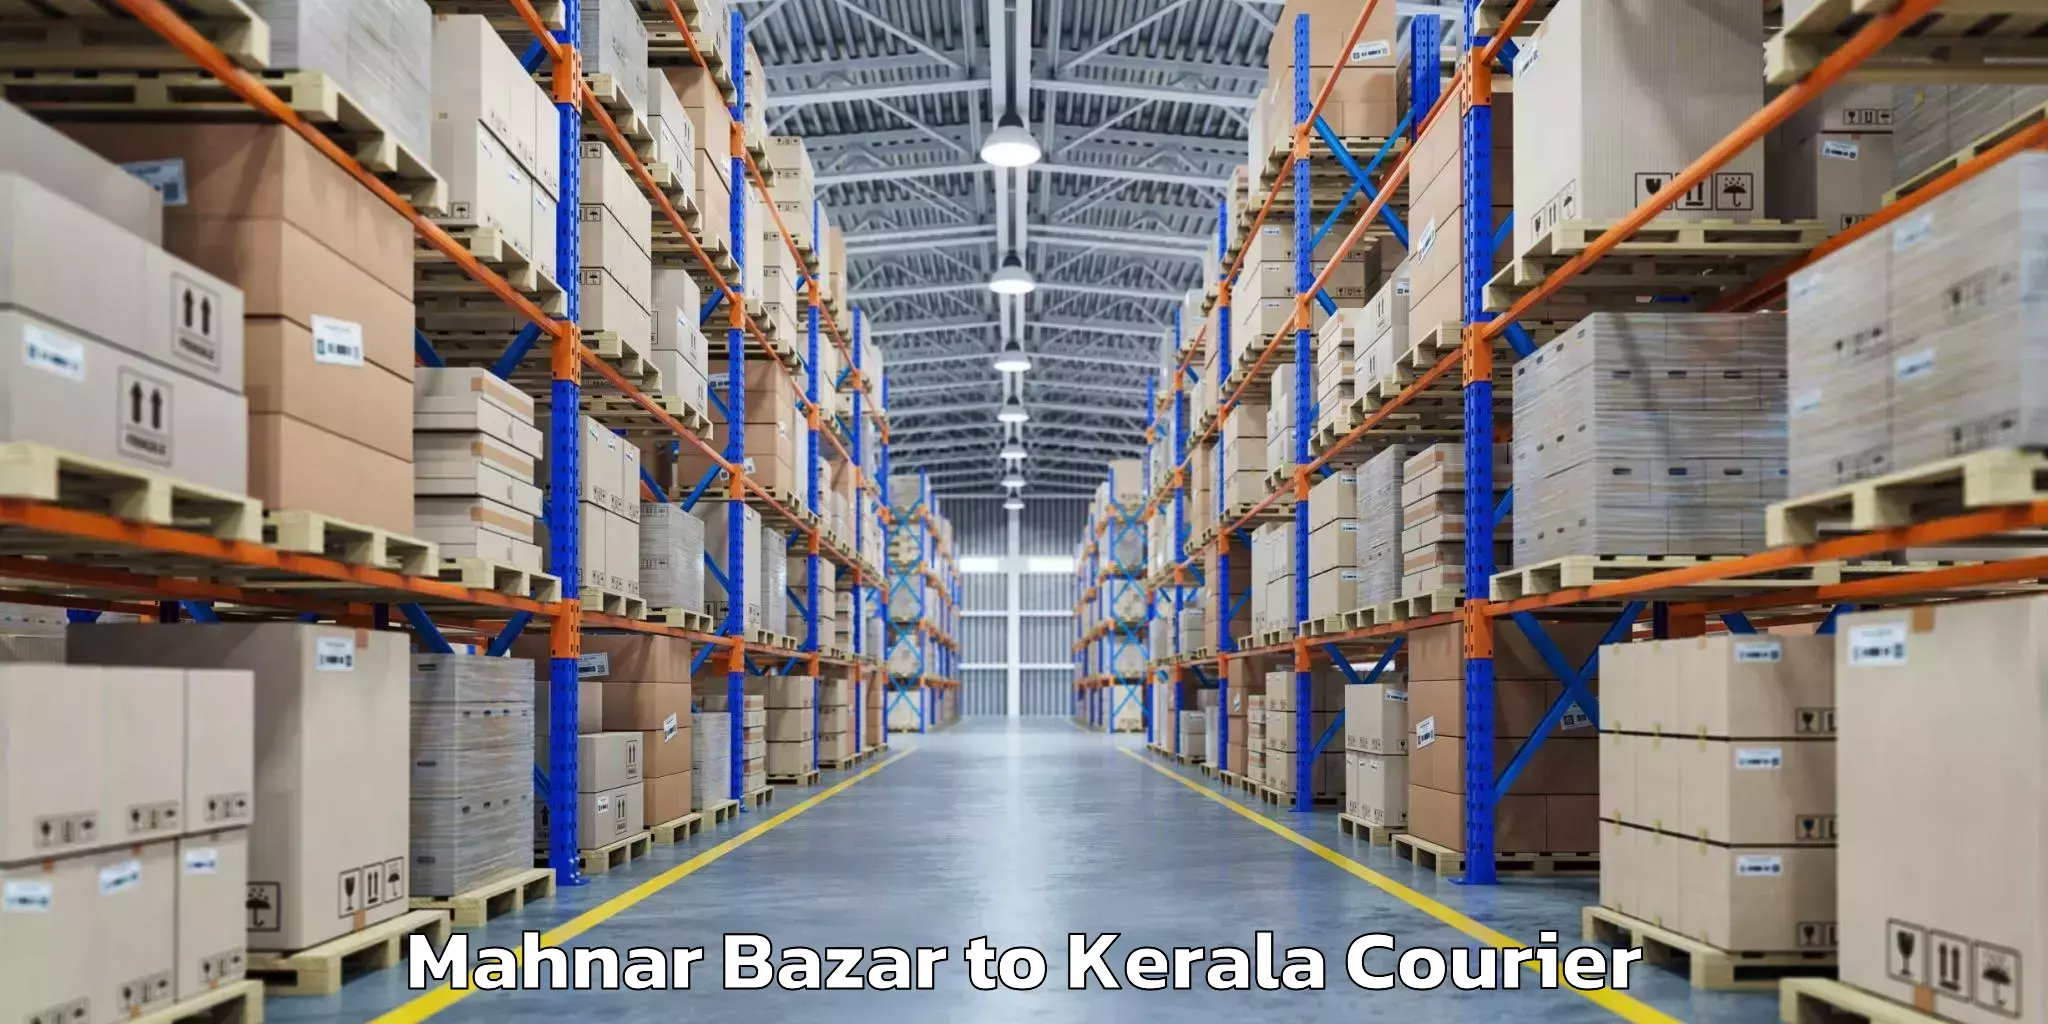 Same day luggage service Mahnar Bazar to Cochin University of Science and Technology